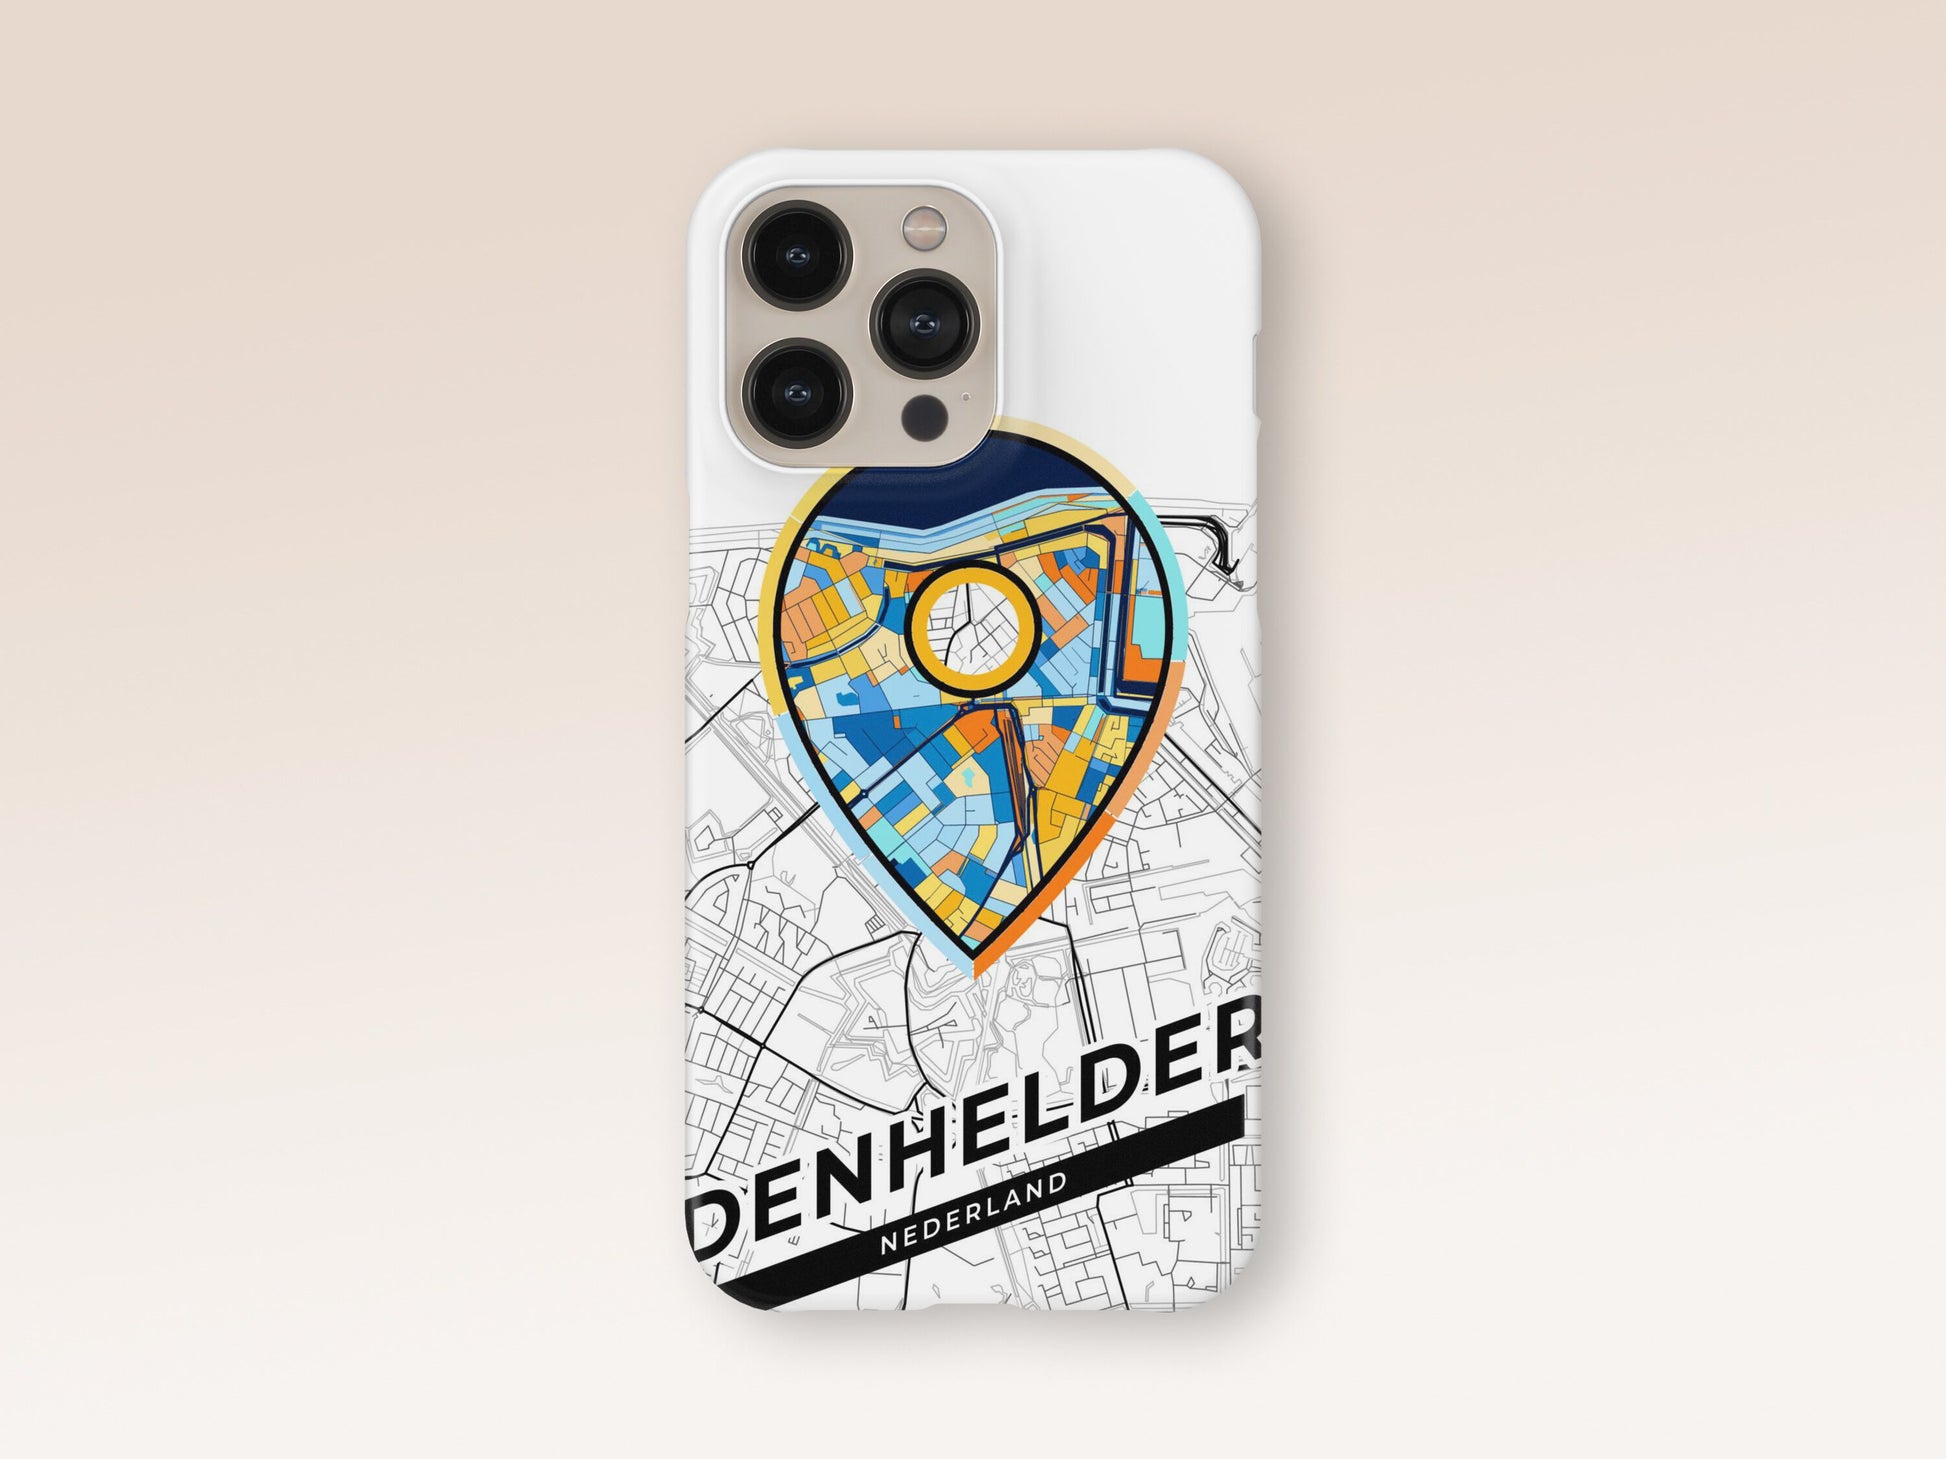 Den Helder Netherlands slim phone case with colorful icon. Birthday, wedding or housewarming gift. Couple match cases. 1